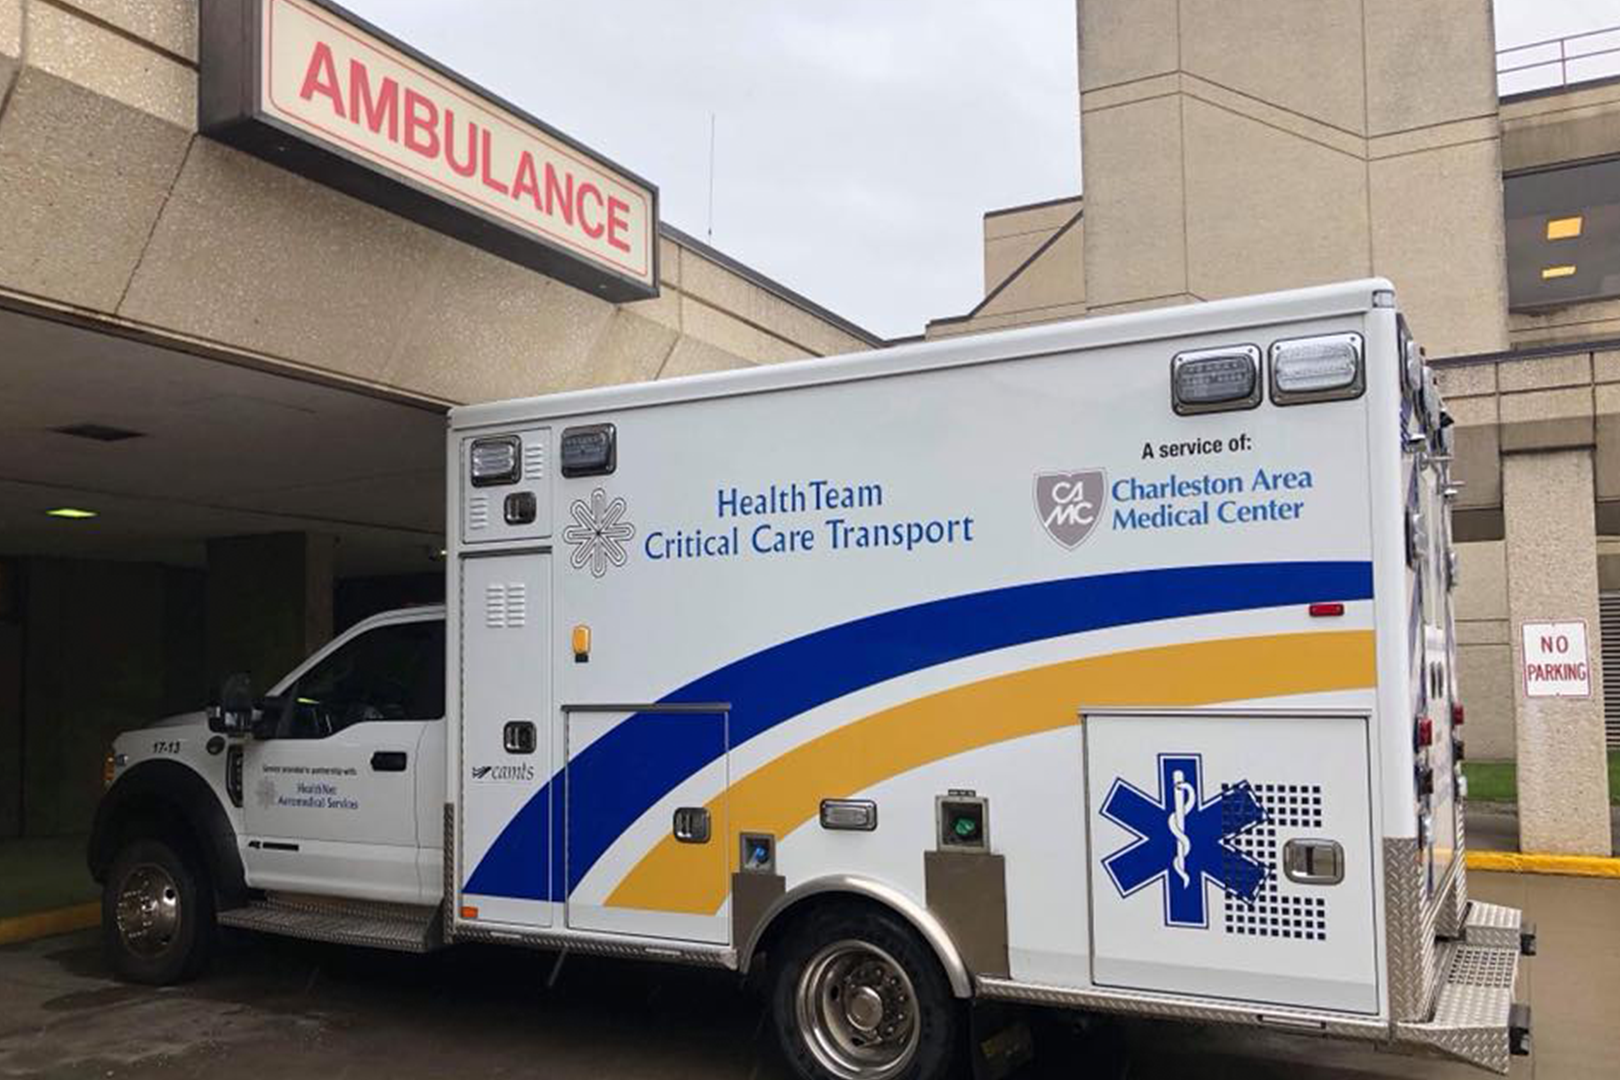 An image of HealthTeam Critical Care Transport's official ambulance